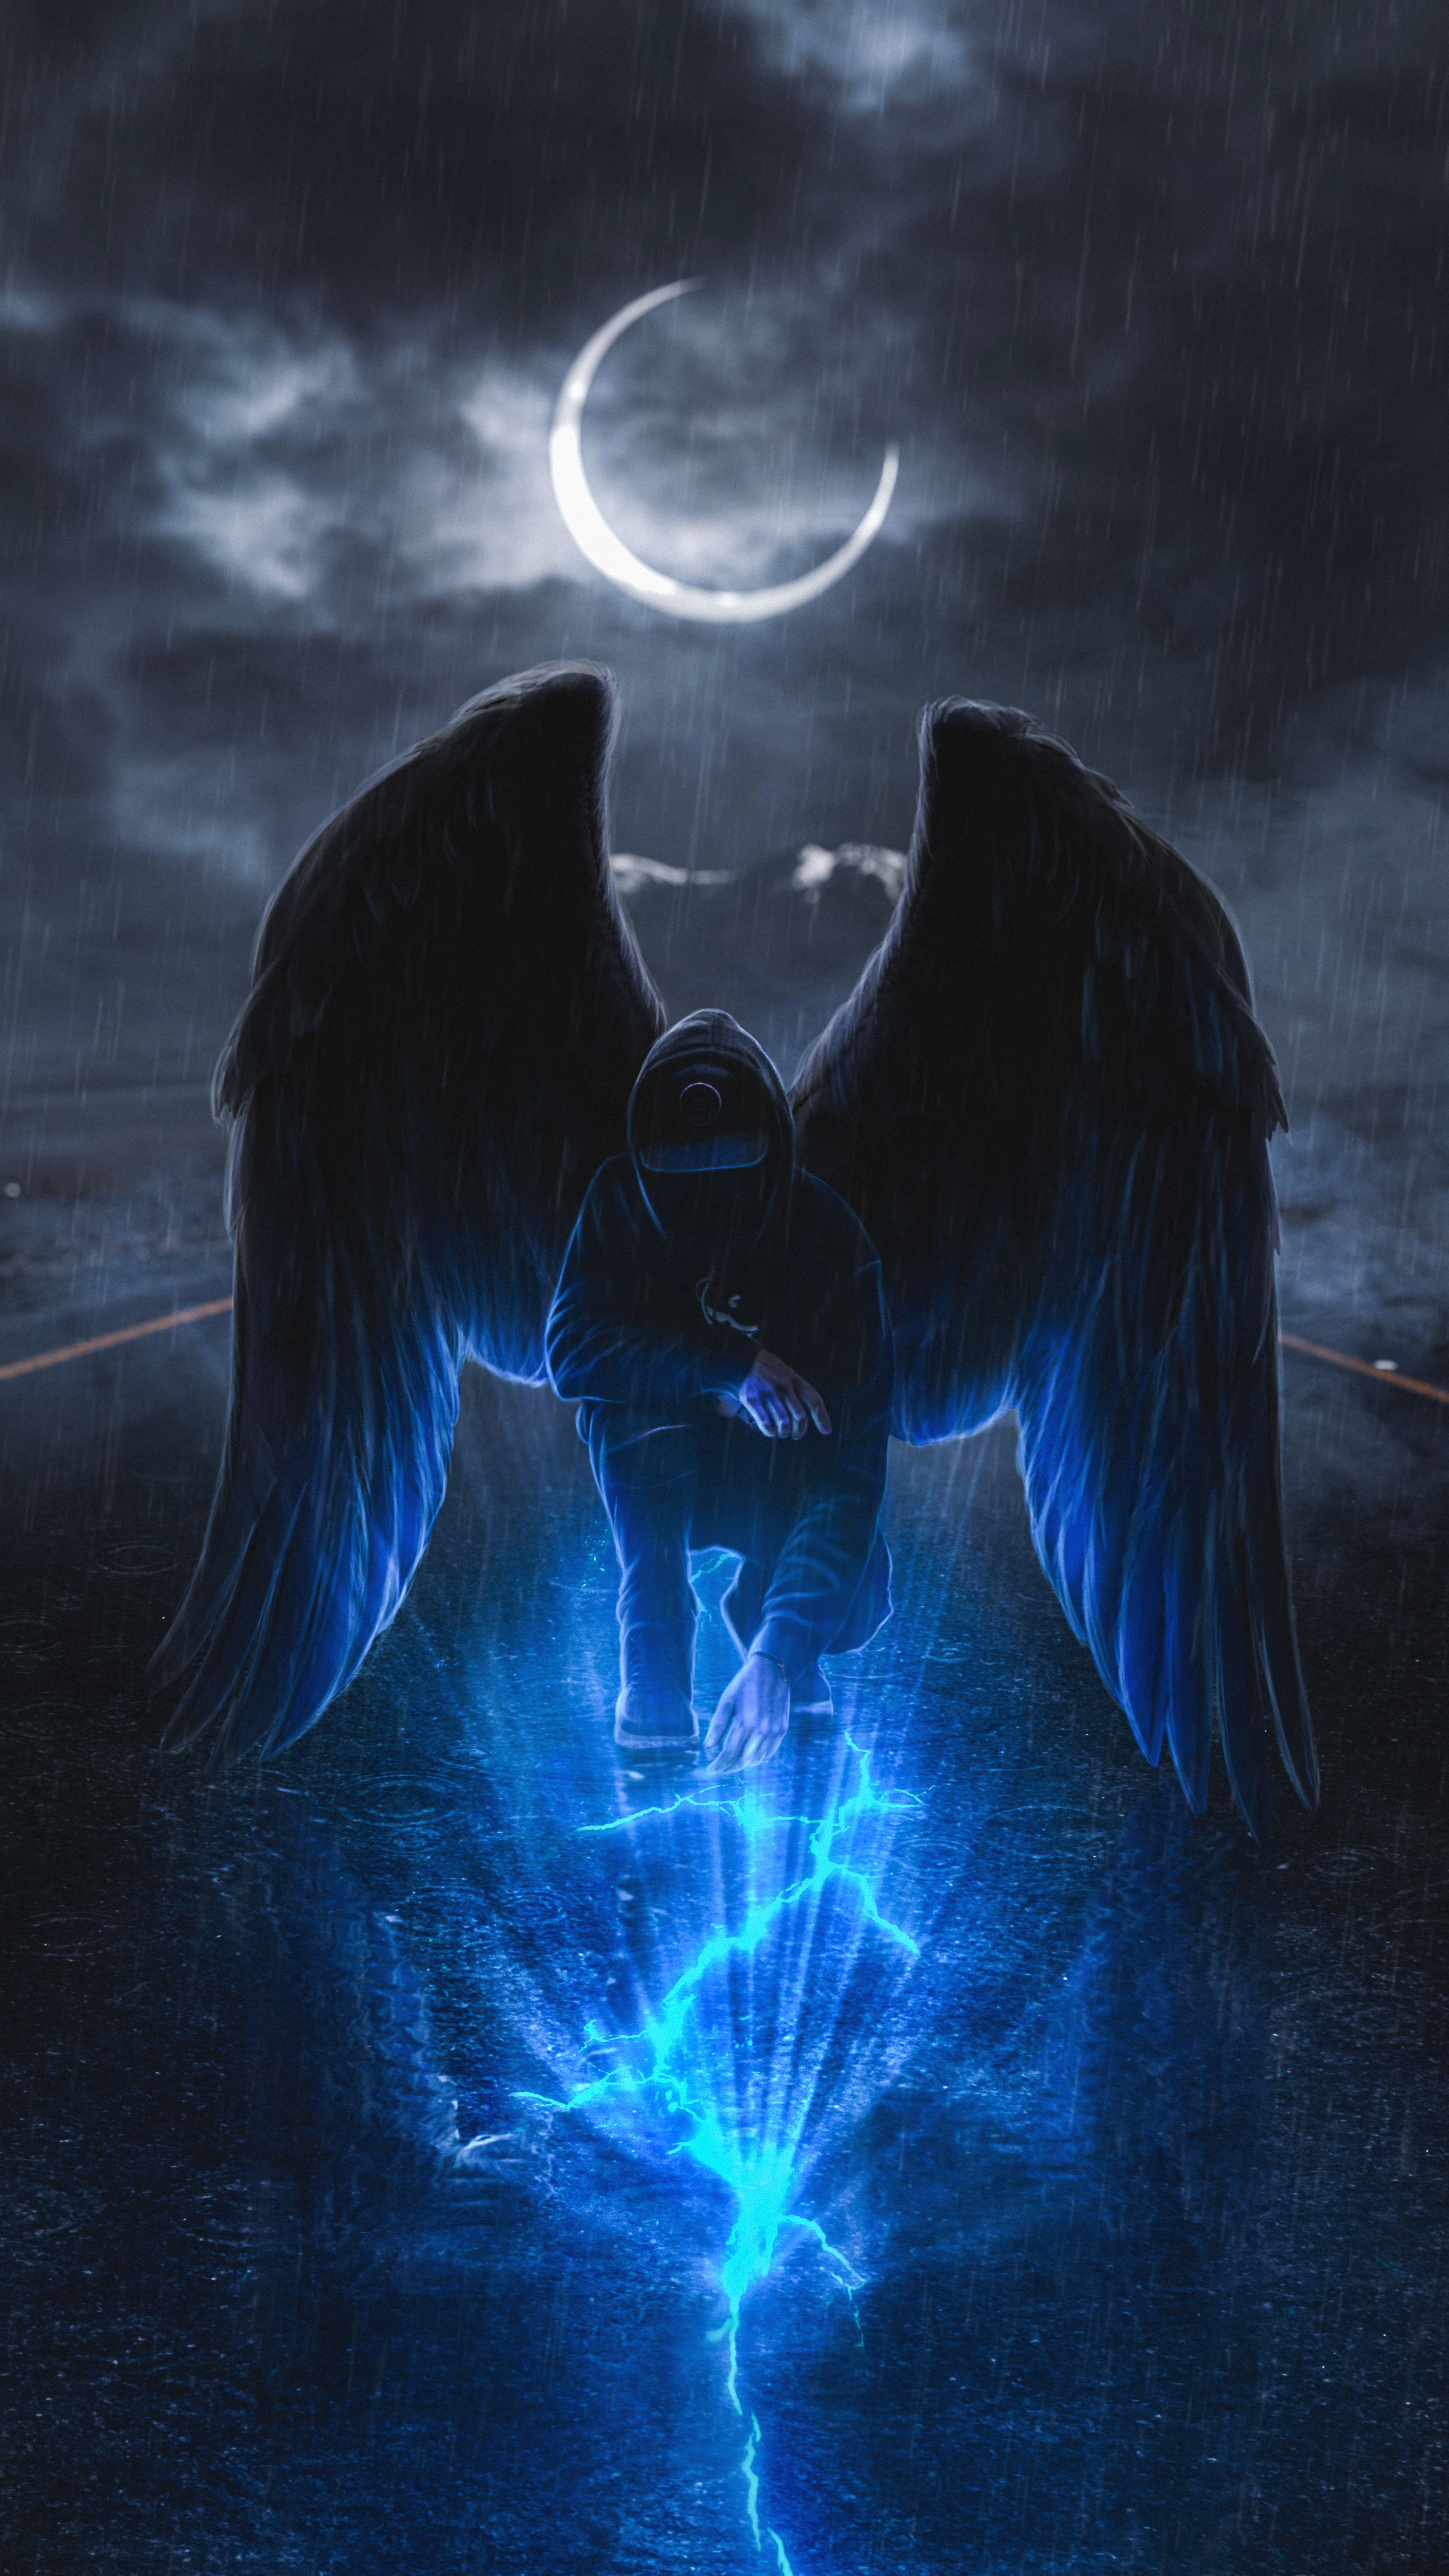 Free Angel And Devil Wallpaper, Angel And Devil Wallpaper Download -  WallpaperUse - 1